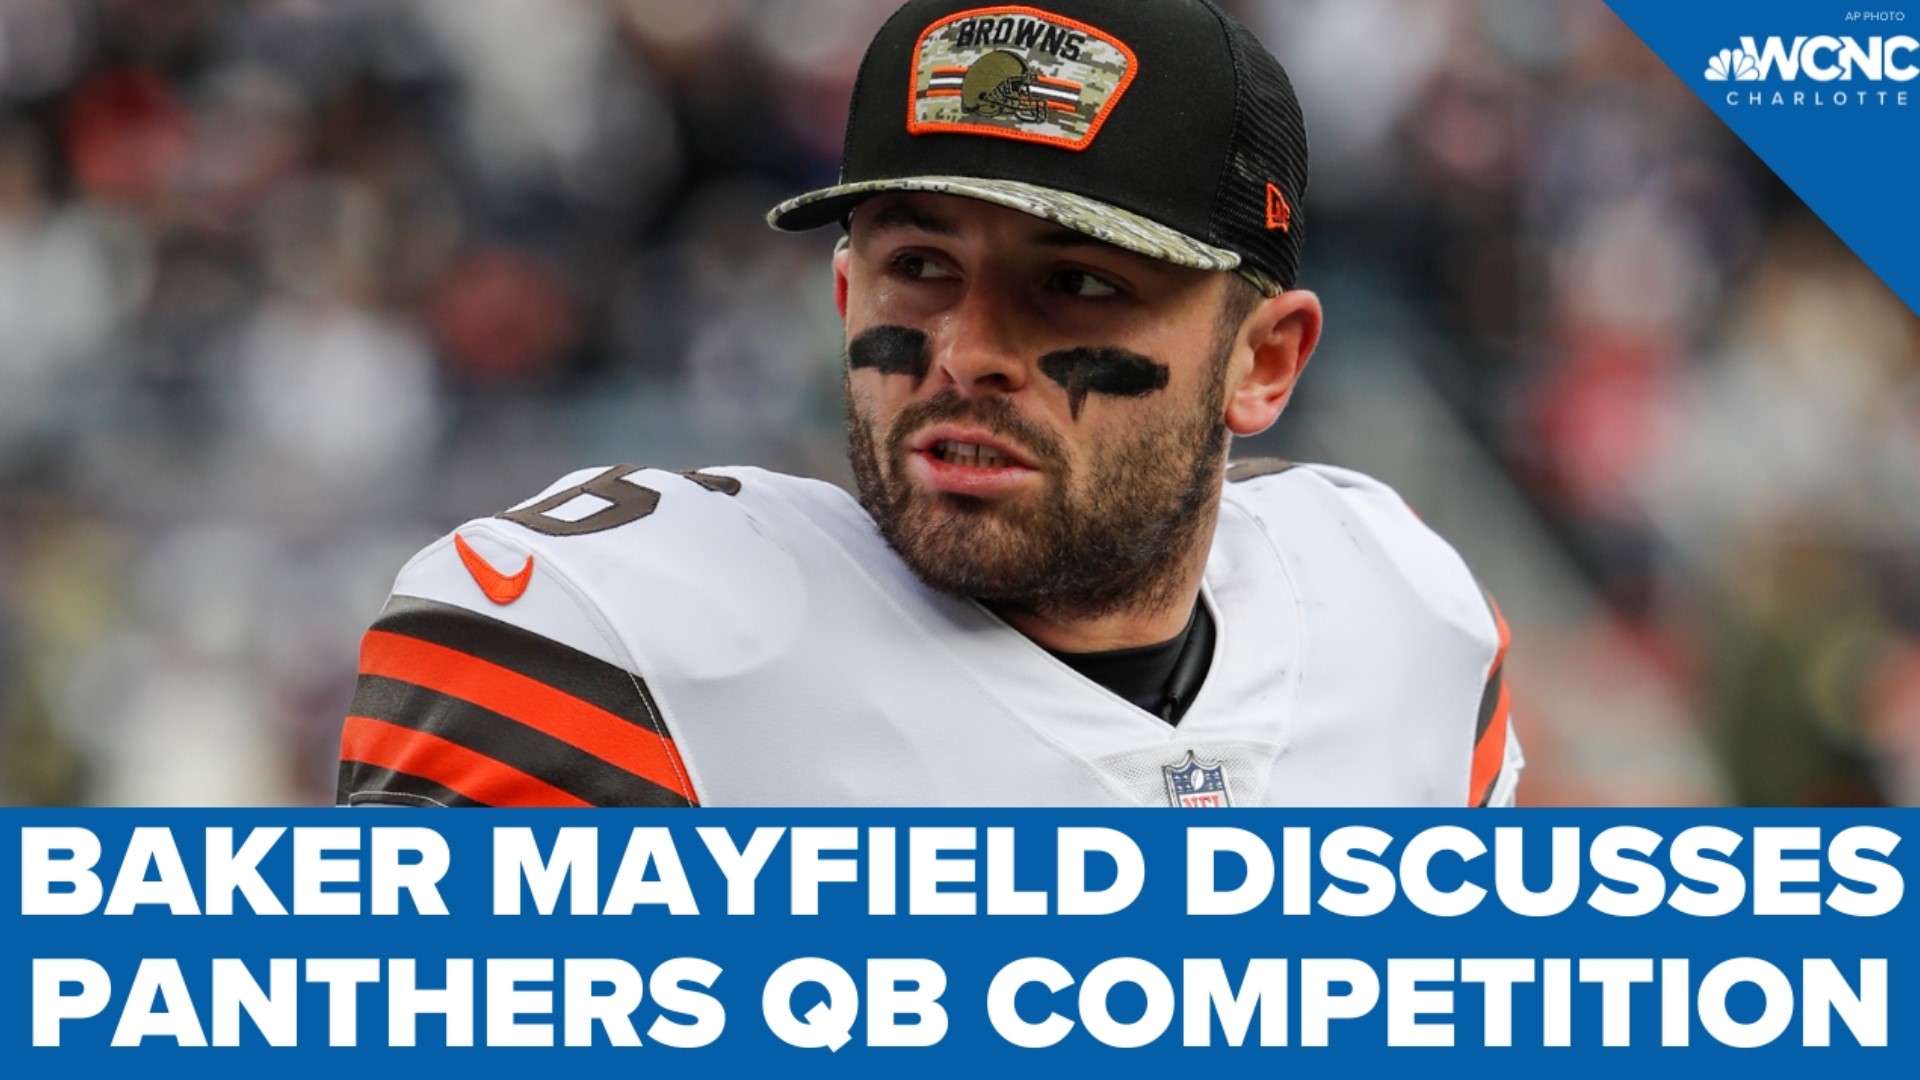 Mayfield held his first Q&A as a member of the Panthers Tuesday, and discussed his shoulder injury, leaving the Browns and his goals with the Panthers.